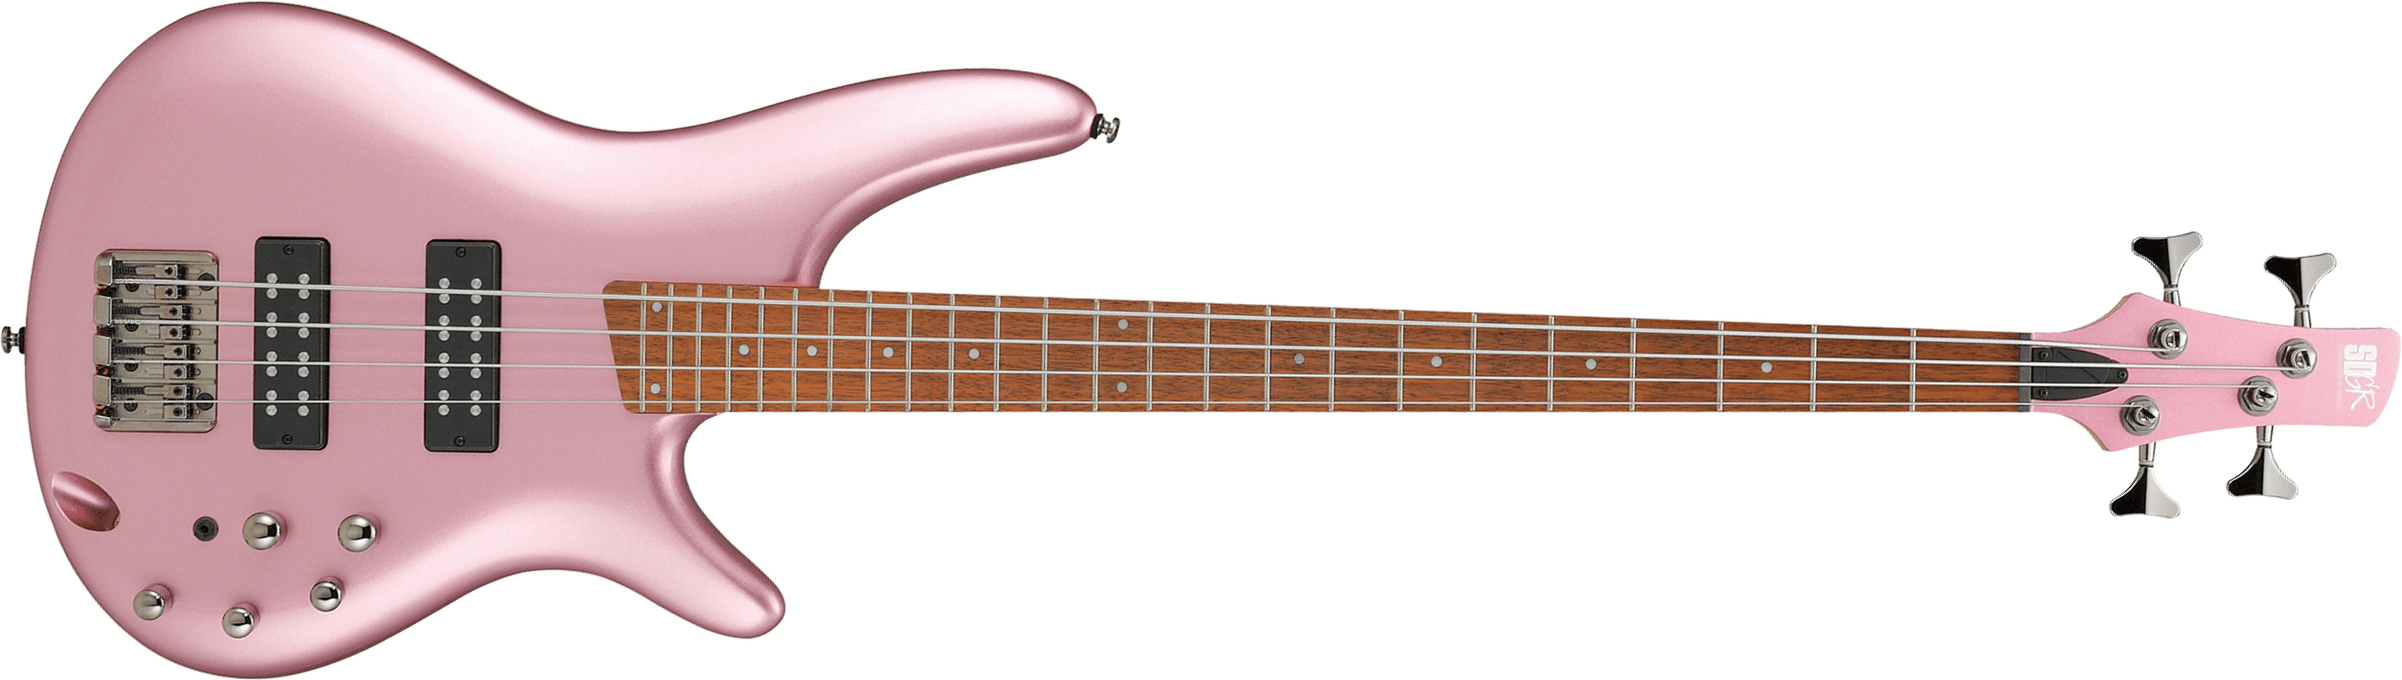 Ibanez Sr300e Pgm Standard Active Jat - Pink Gold Metallic - Solidbody E-bass - Main picture